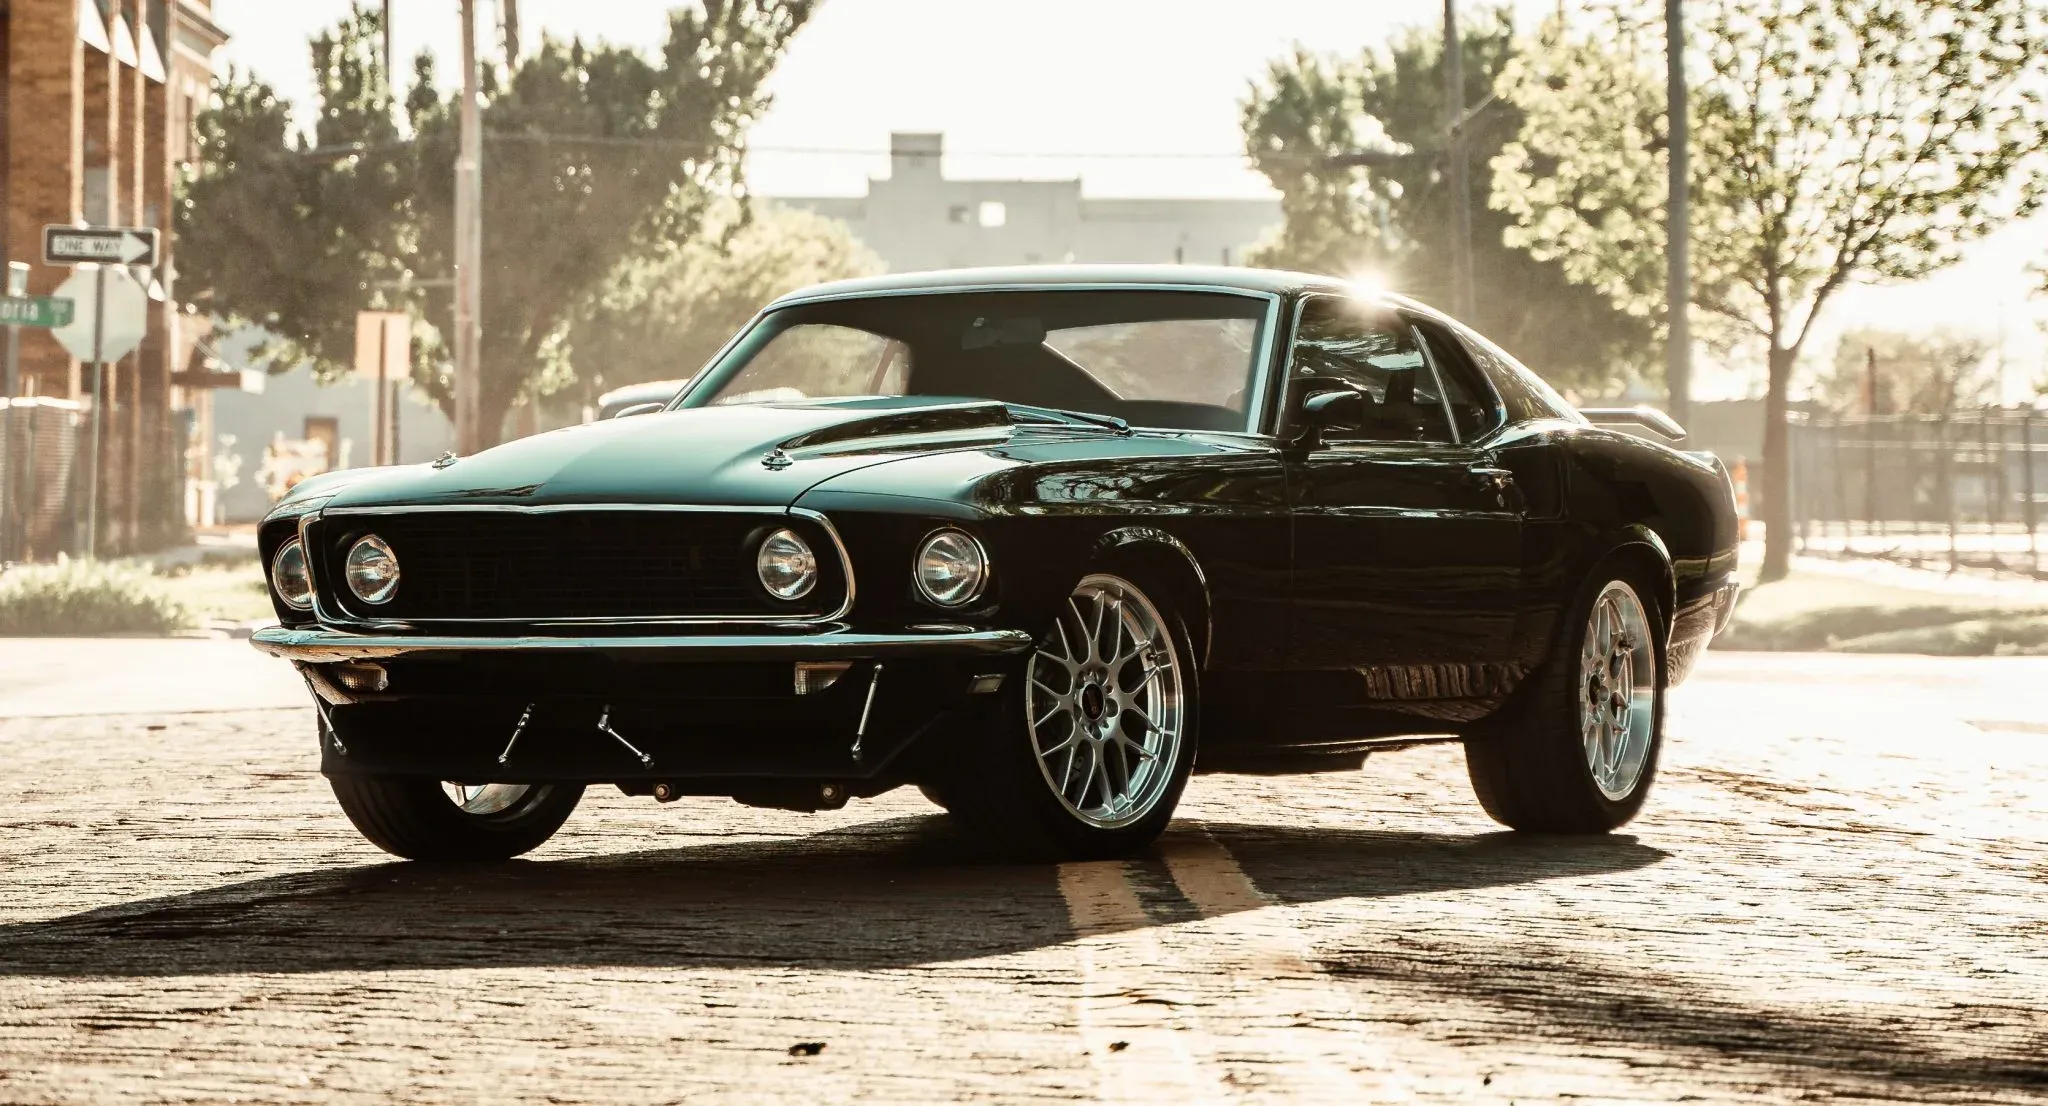 8 Coolest Features Of The 1969 Mustang Mach 1 Collectors Should Know About